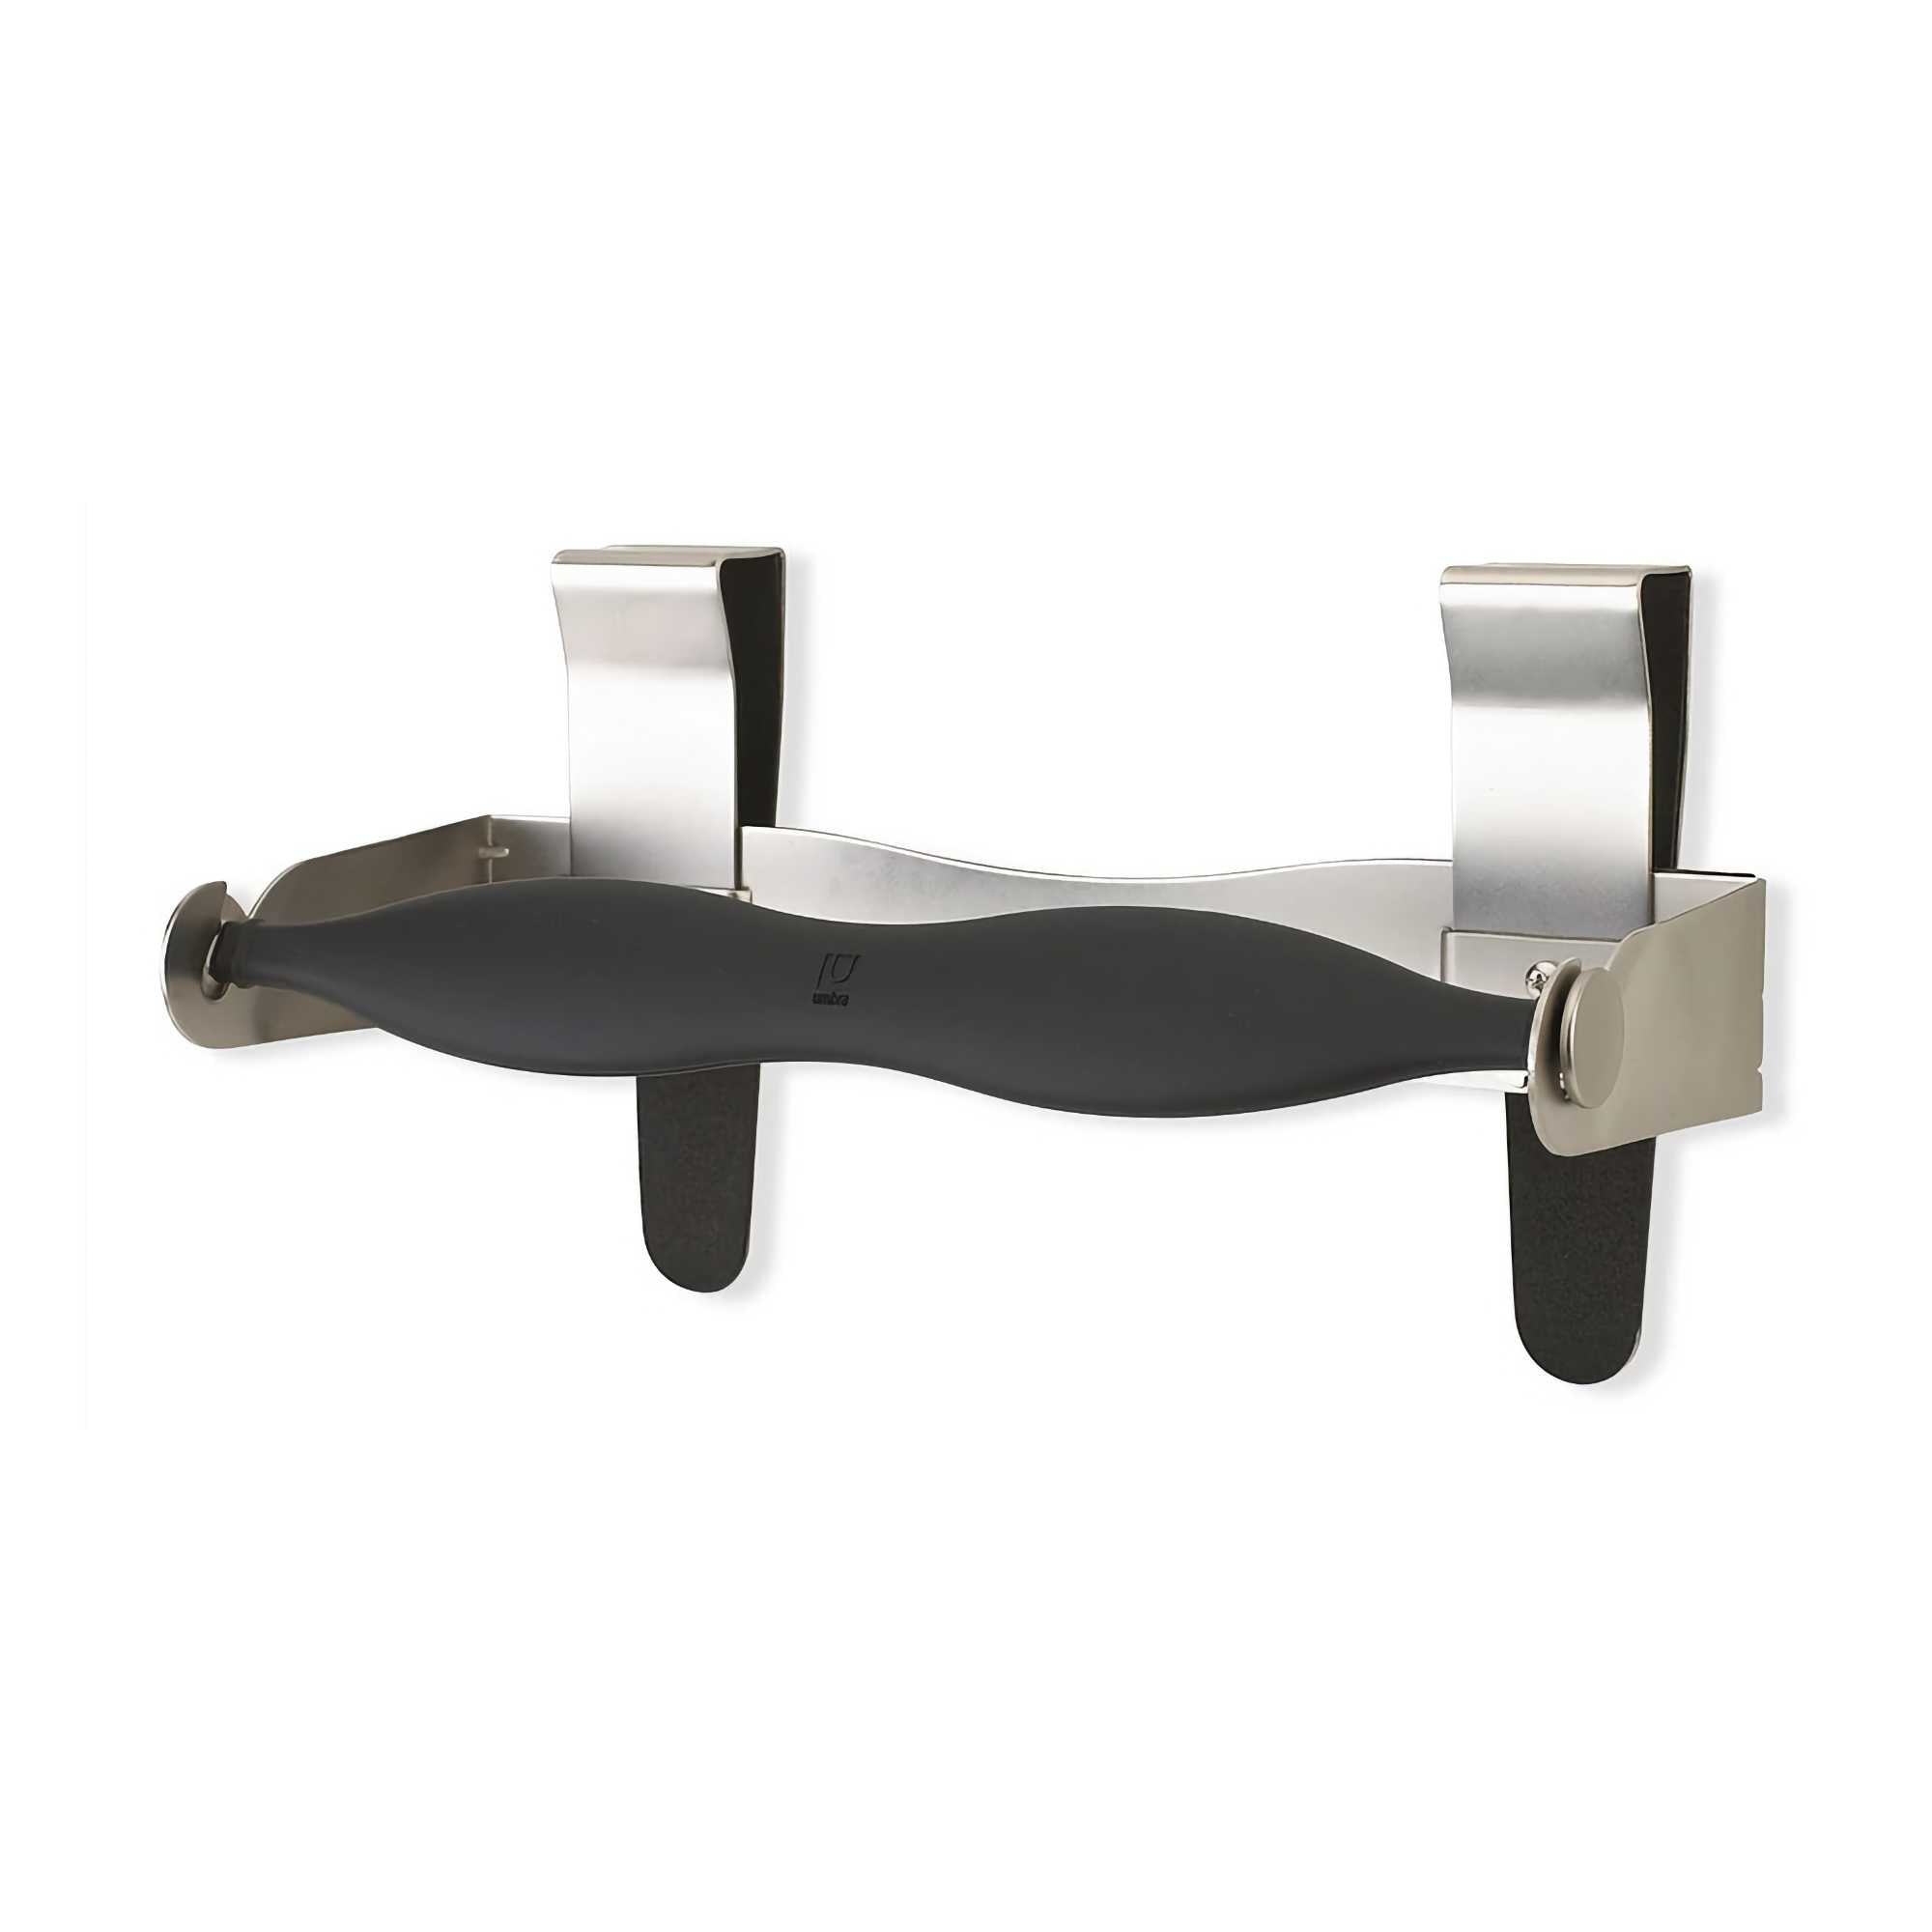 Umbra Mountie Wall Mounted Paper Towel Holder